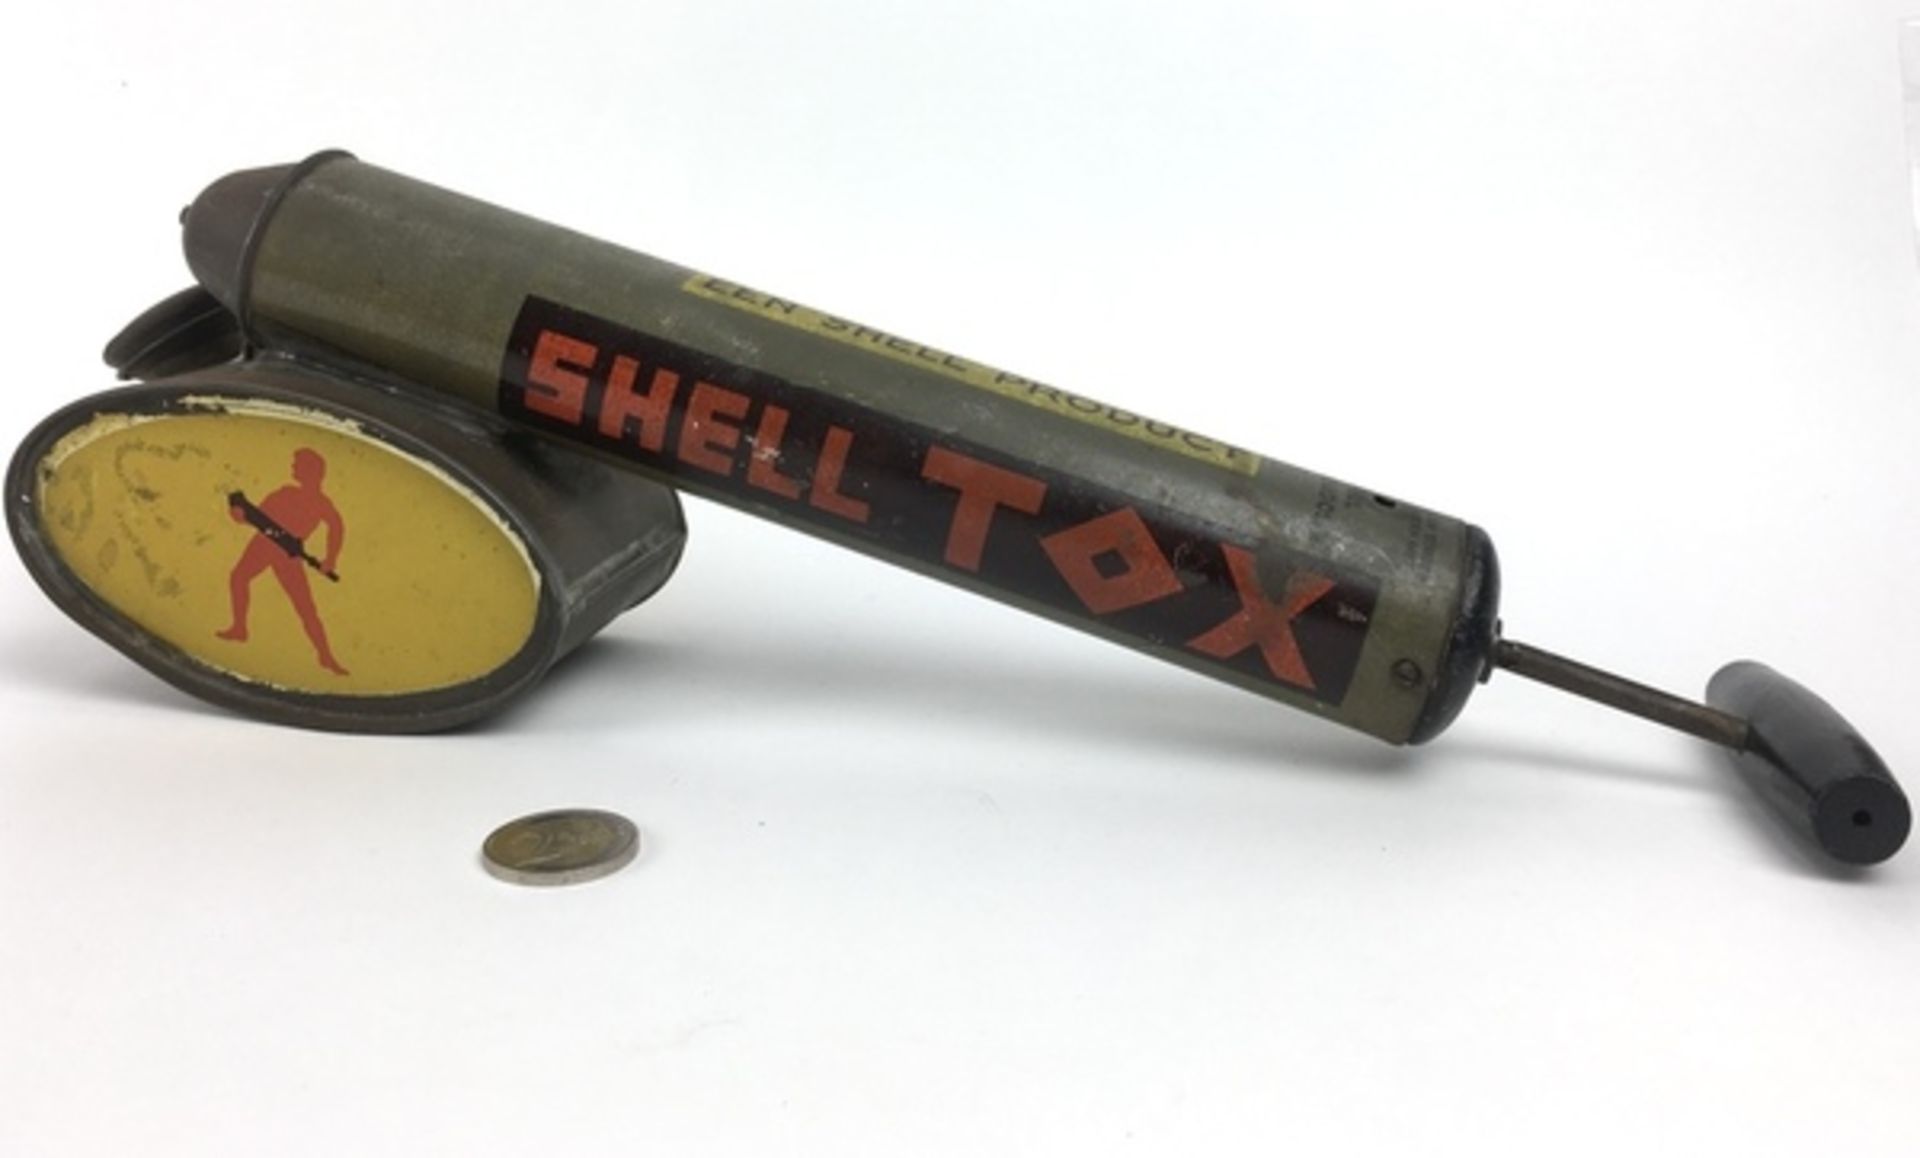 (Curiosa) Shell Tox insecticide verstuiver Shell Tox insecticide verstuiver uit de periode 193 - Image 2 of 7